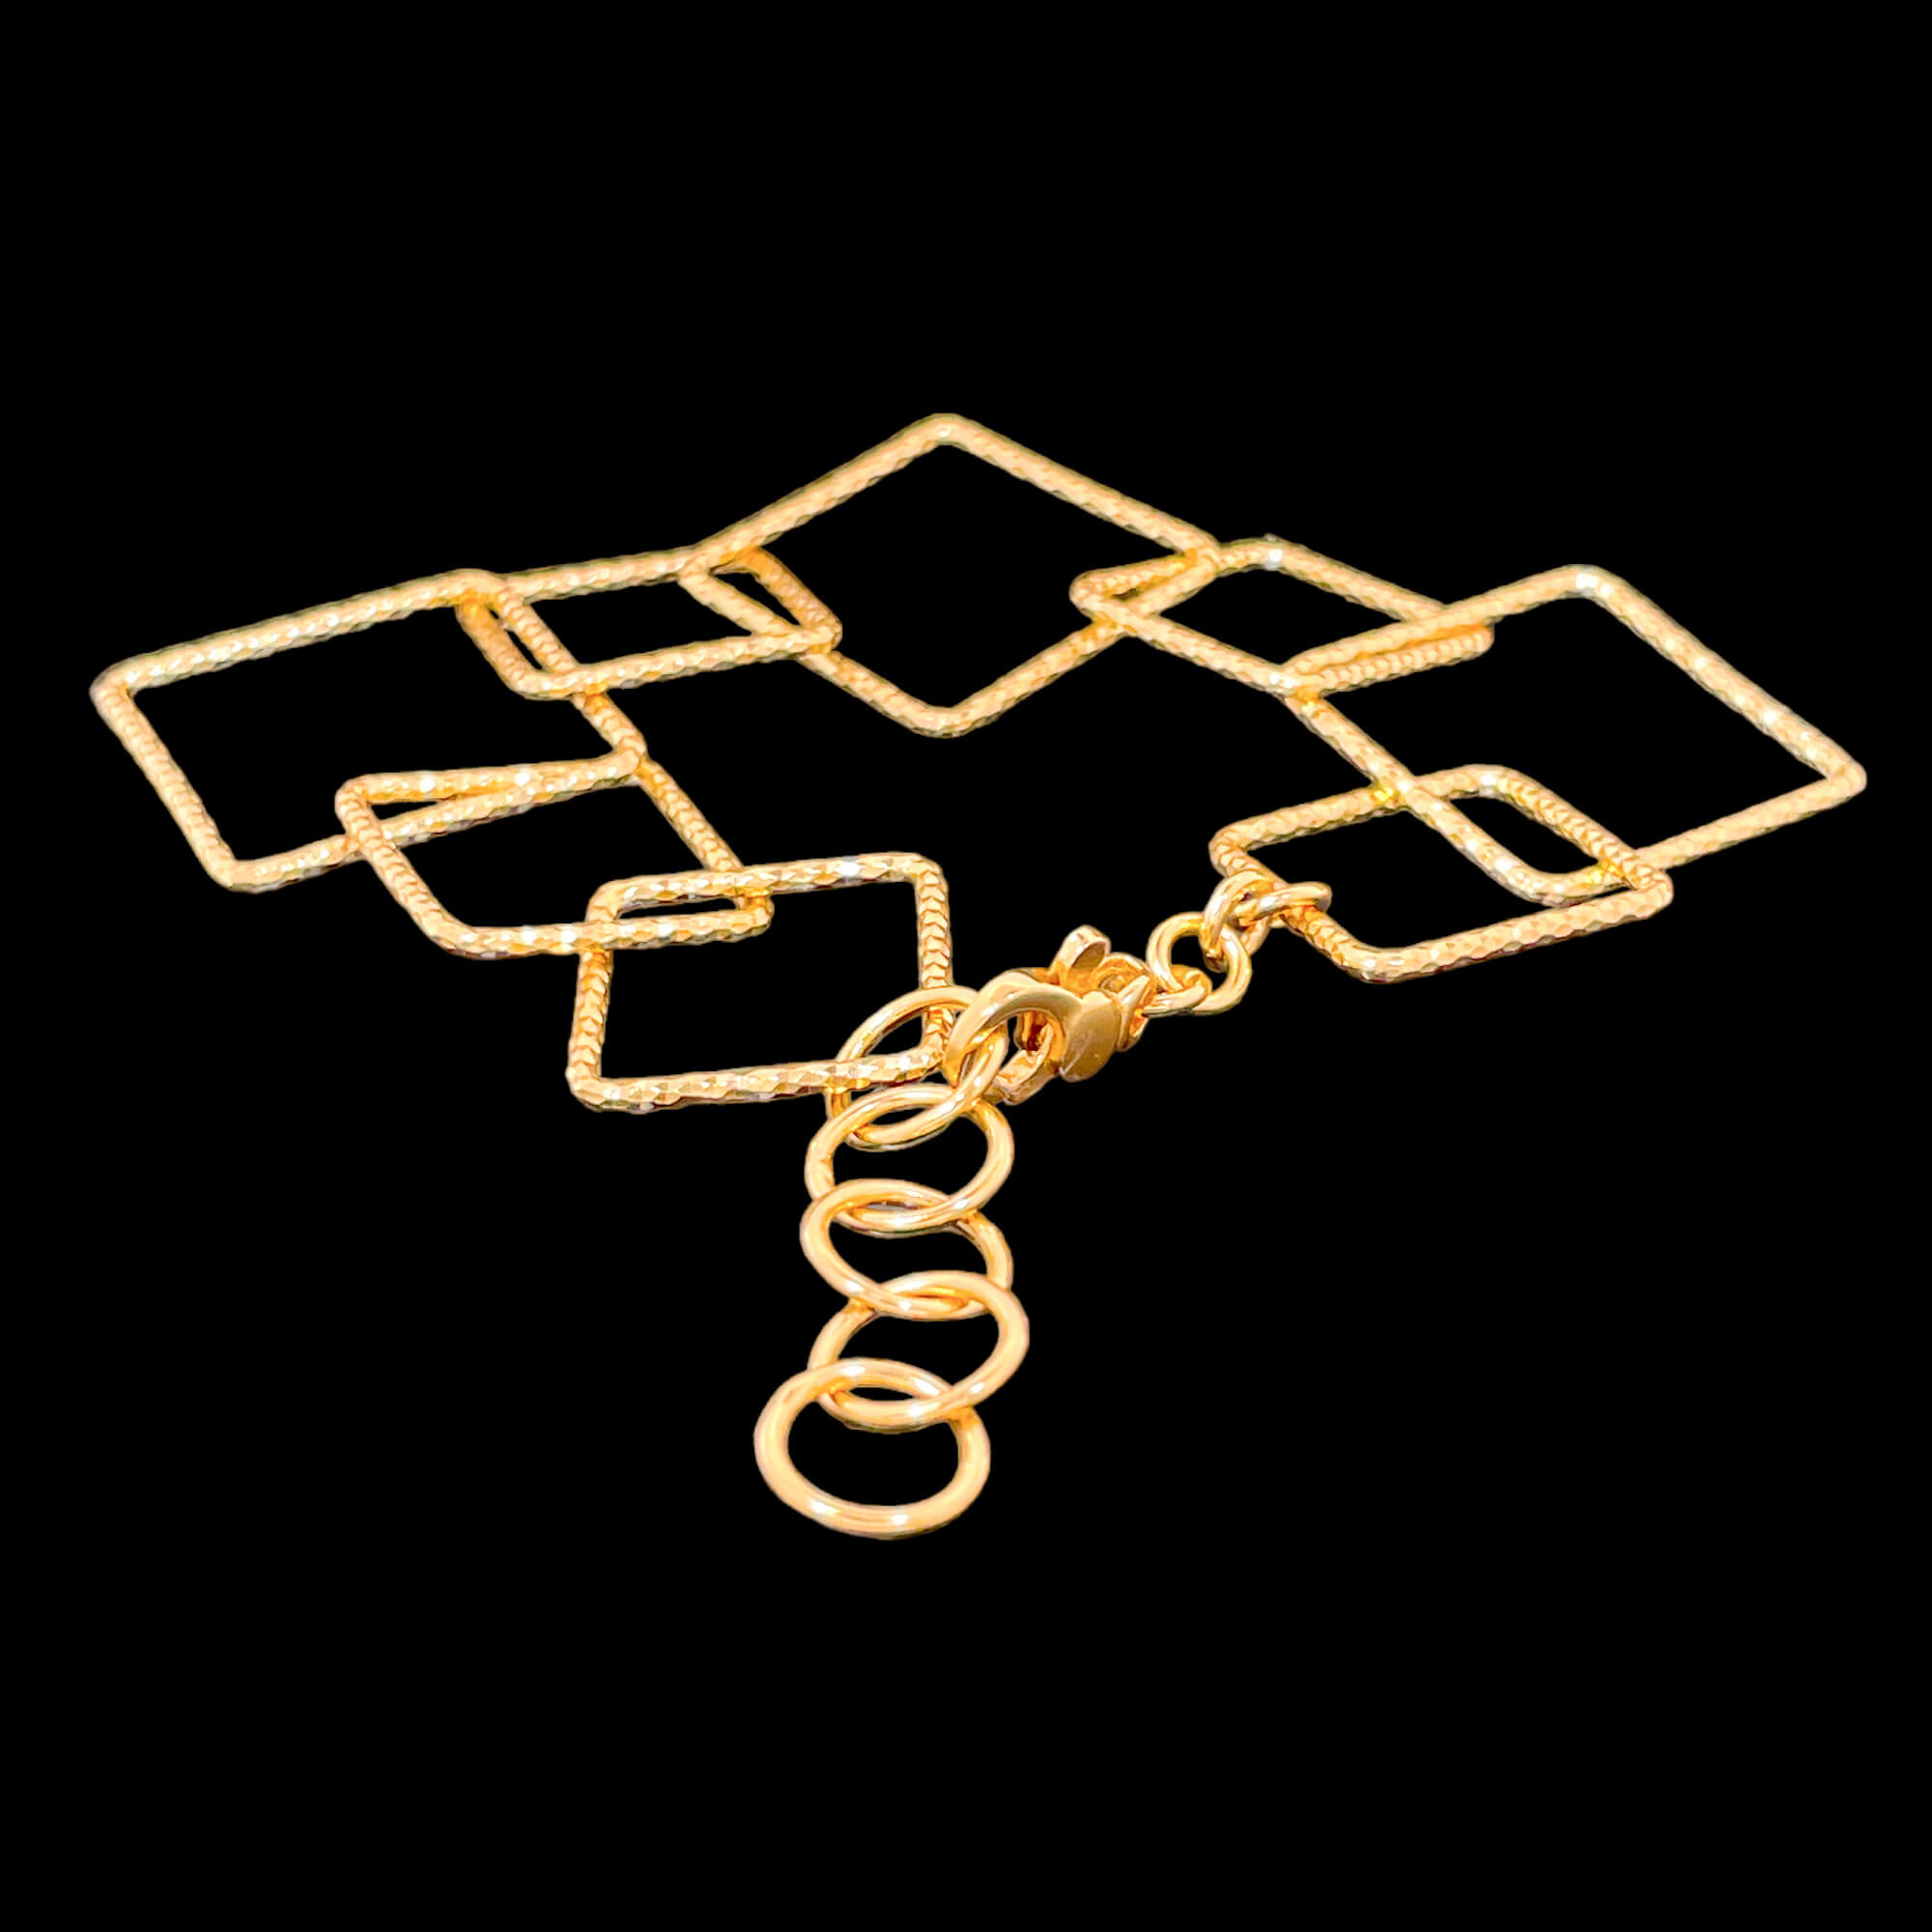 Gilded bracelet with open squares